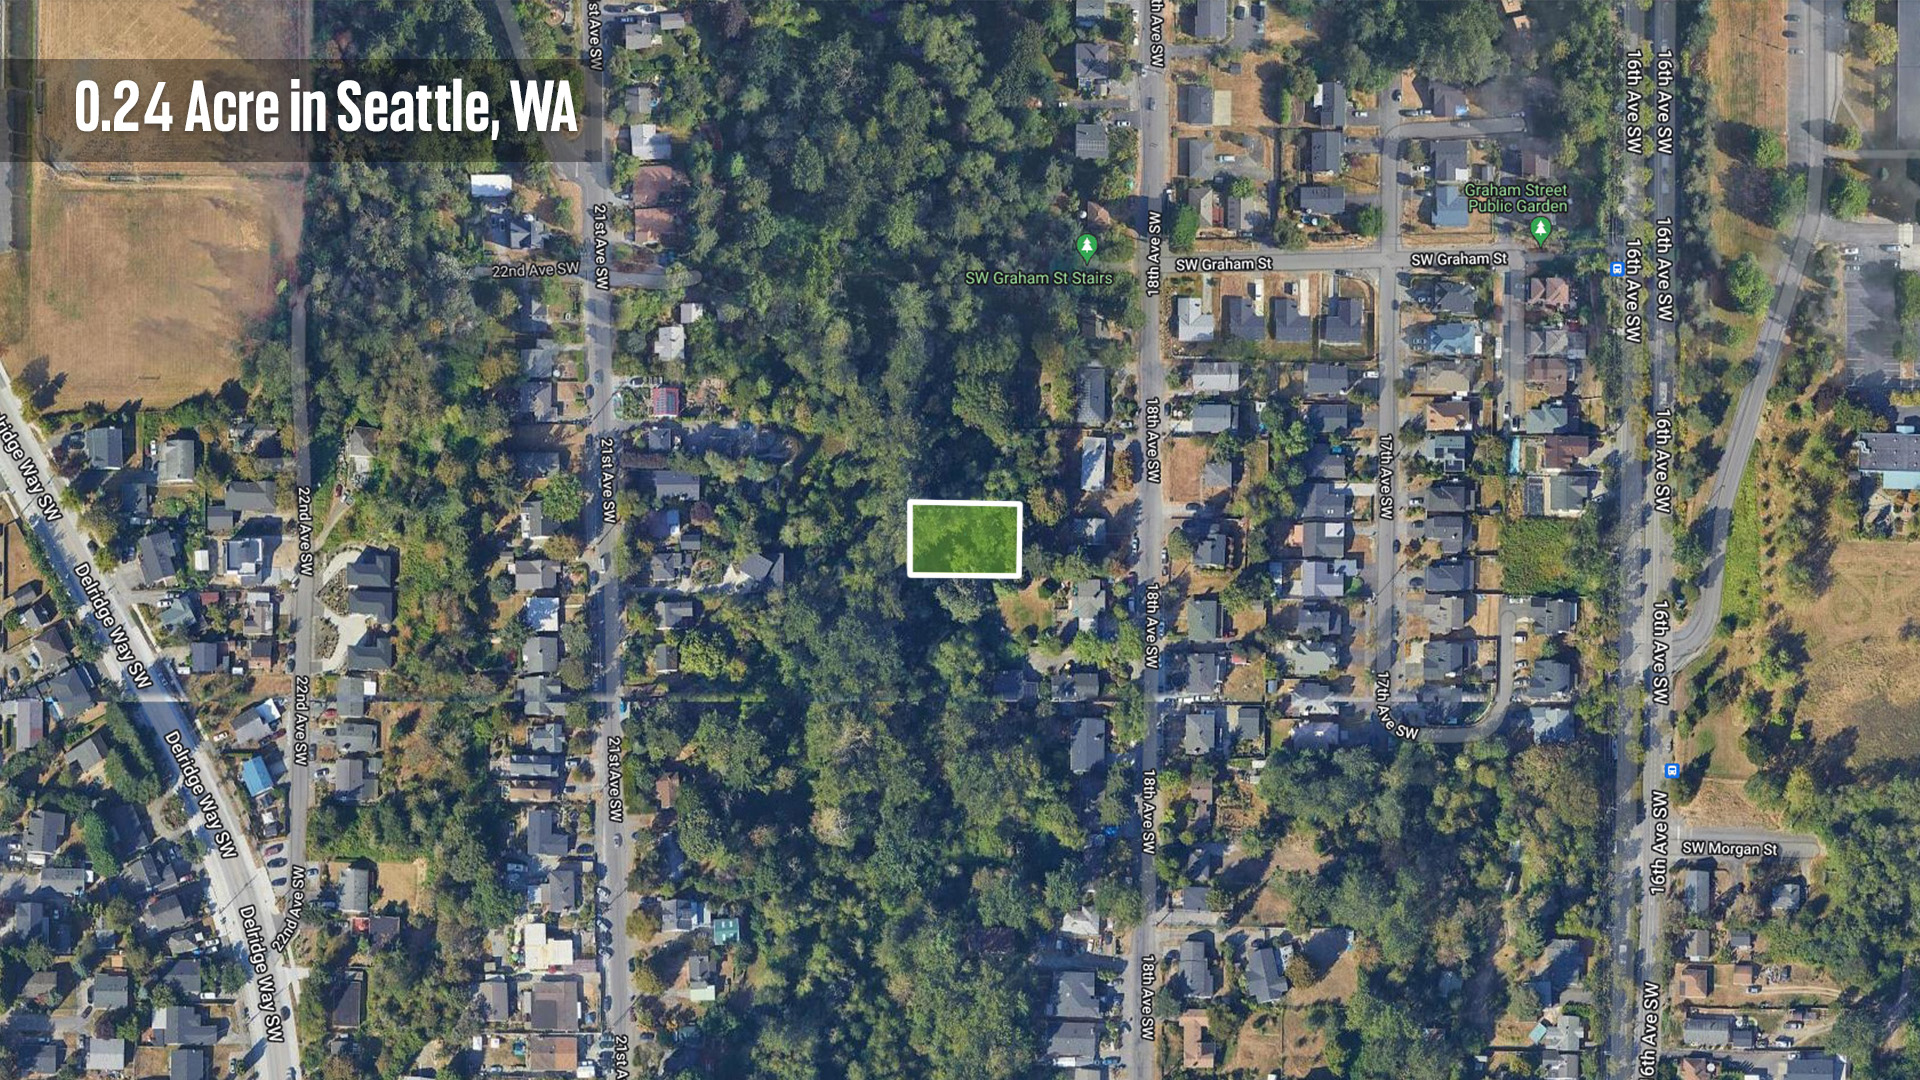  0.24 Acre Highly desirable area in Seattle, Washington